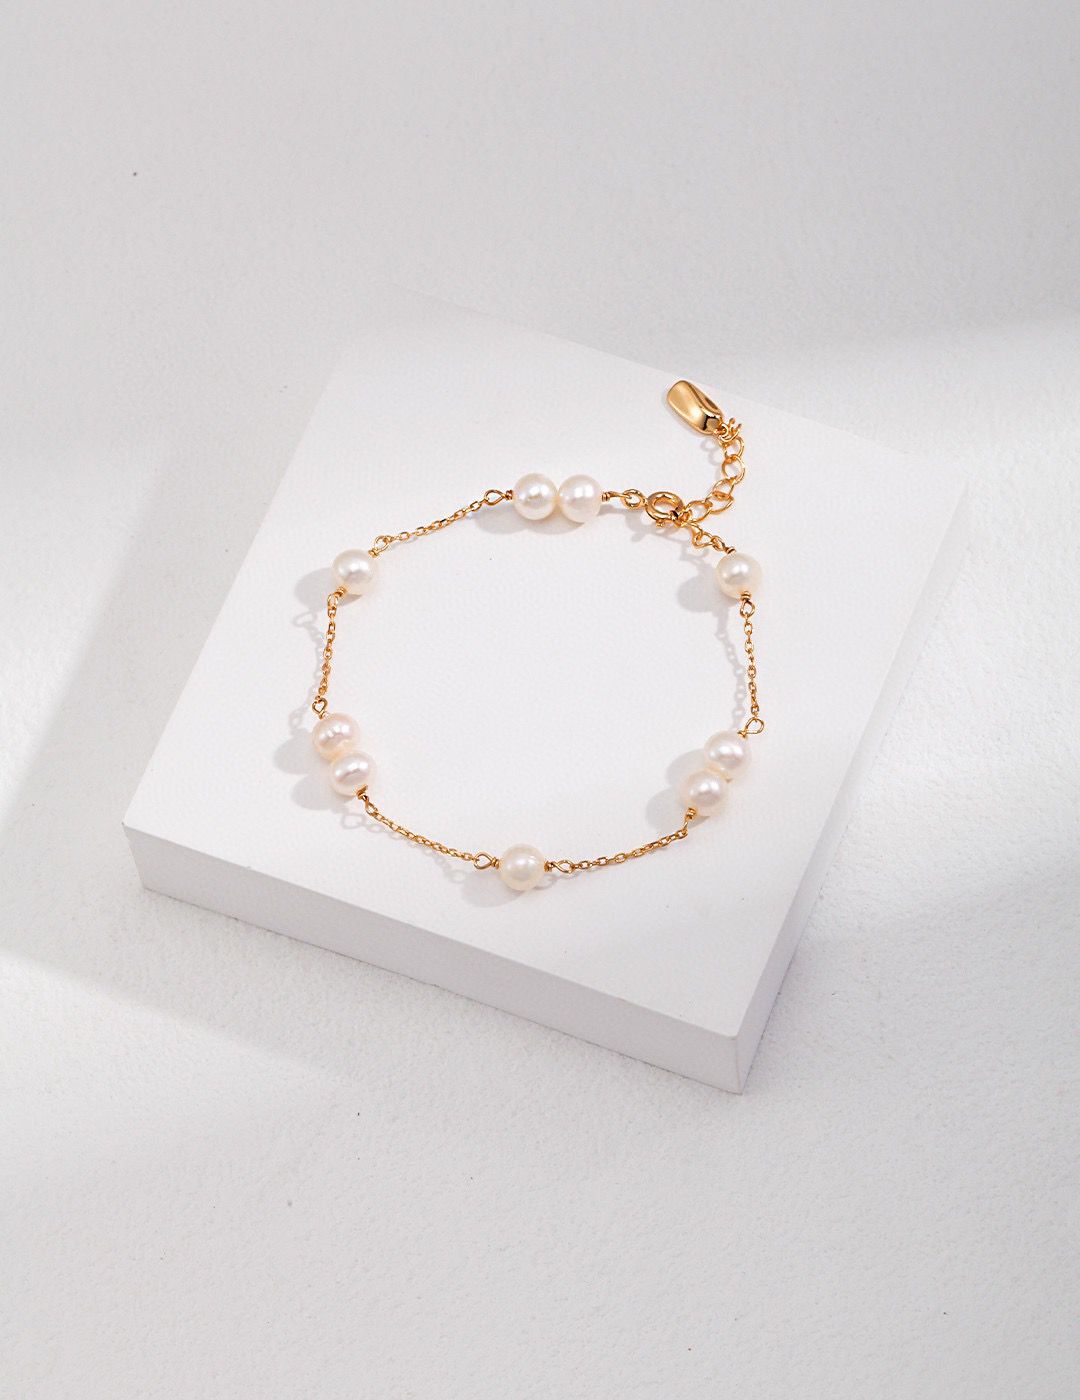 Classic Pearl Bracelet with freshwater pearls on a sturdy cord and a secure clasp, perfect for any occasion